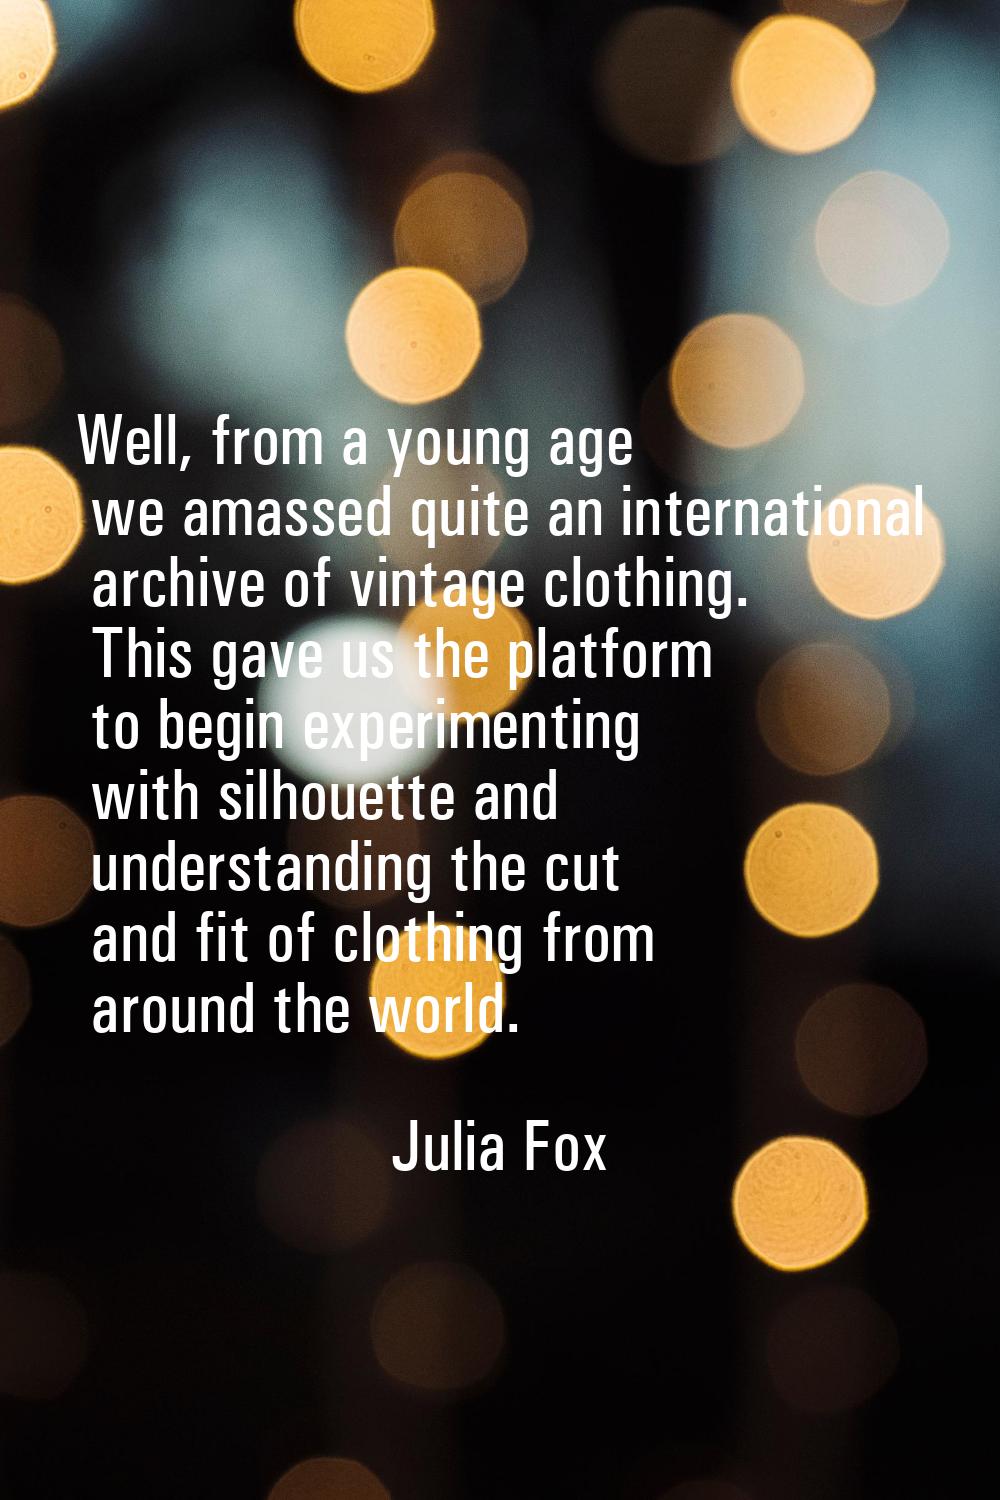 Well, from a young age we amassed quite an international archive of vintage clothing. This gave us 